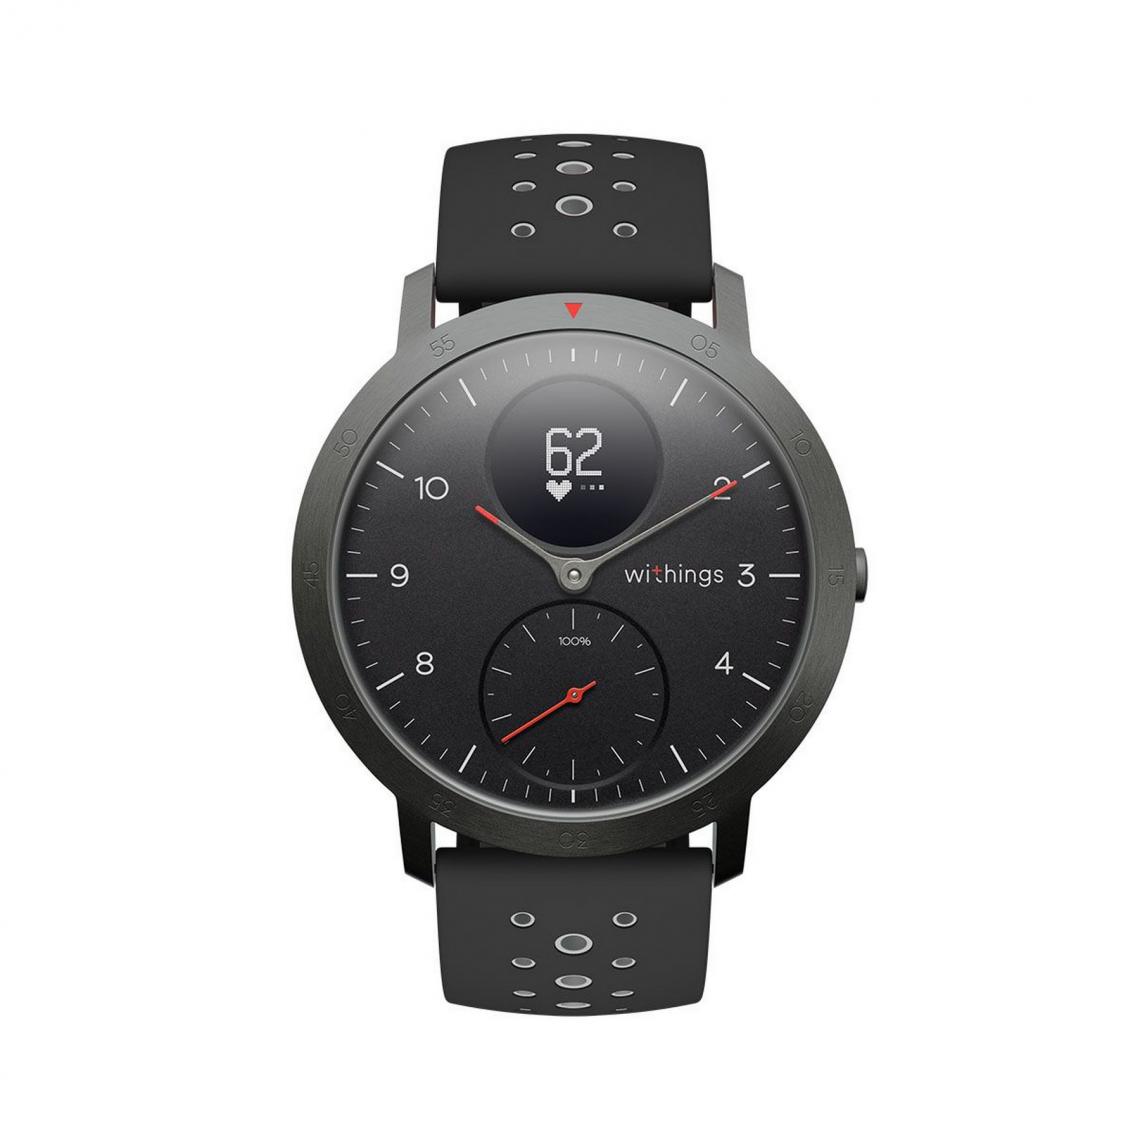 Withings - MONTRE CONNECTÉE WITHINGS STEEL HR SPORT BLACK - Montre connectée